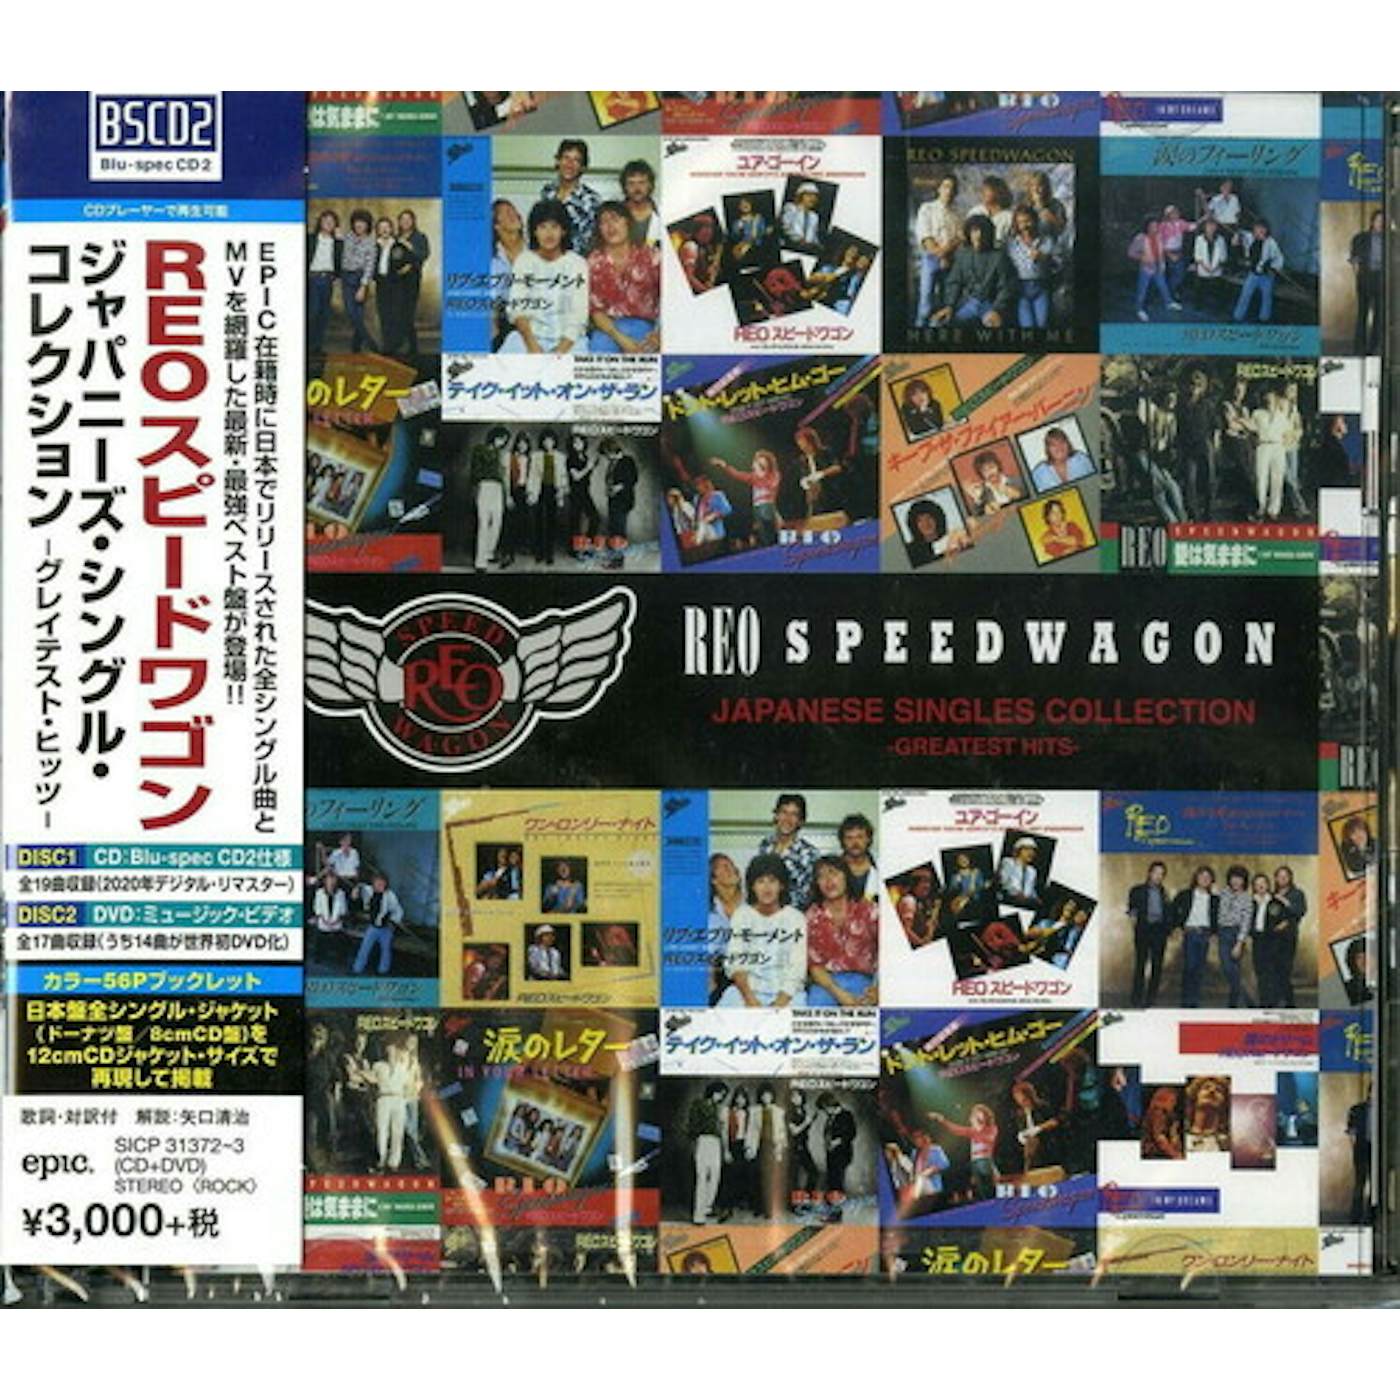 REO Speedwagon JAPANESE SINGLES COLLECTION: GREATEST HITS CD